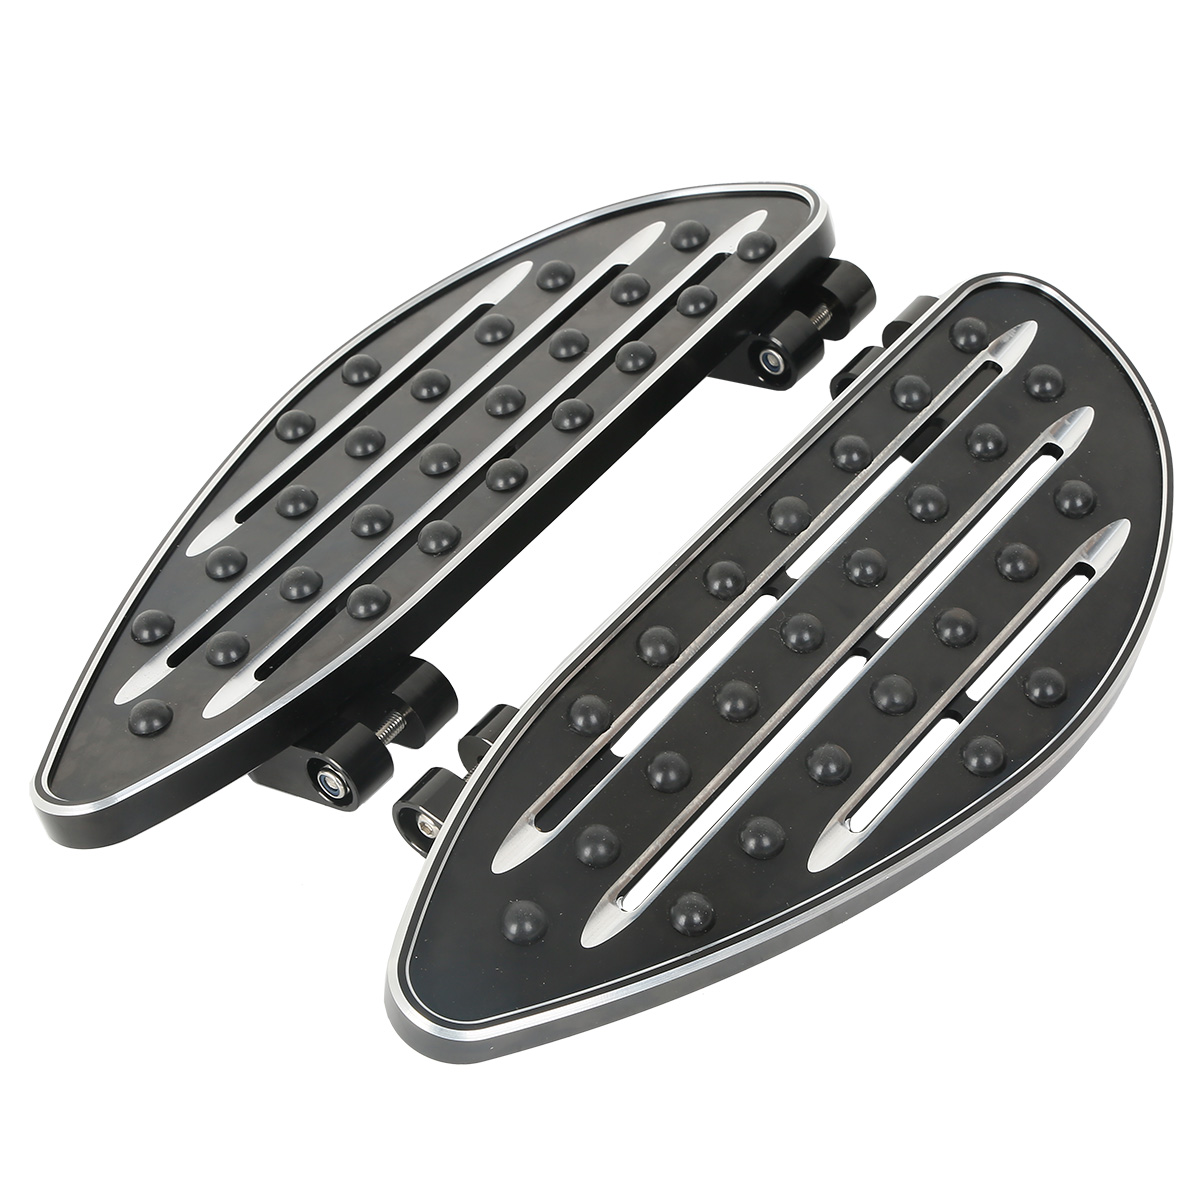 Softail FLST 1986-UP Dyna FLD 2012-UP Three T Driver Footrest Floorboards Insert Compatible with Harley Touring FLHT FLHR FLTR FLHX 1986-2019 